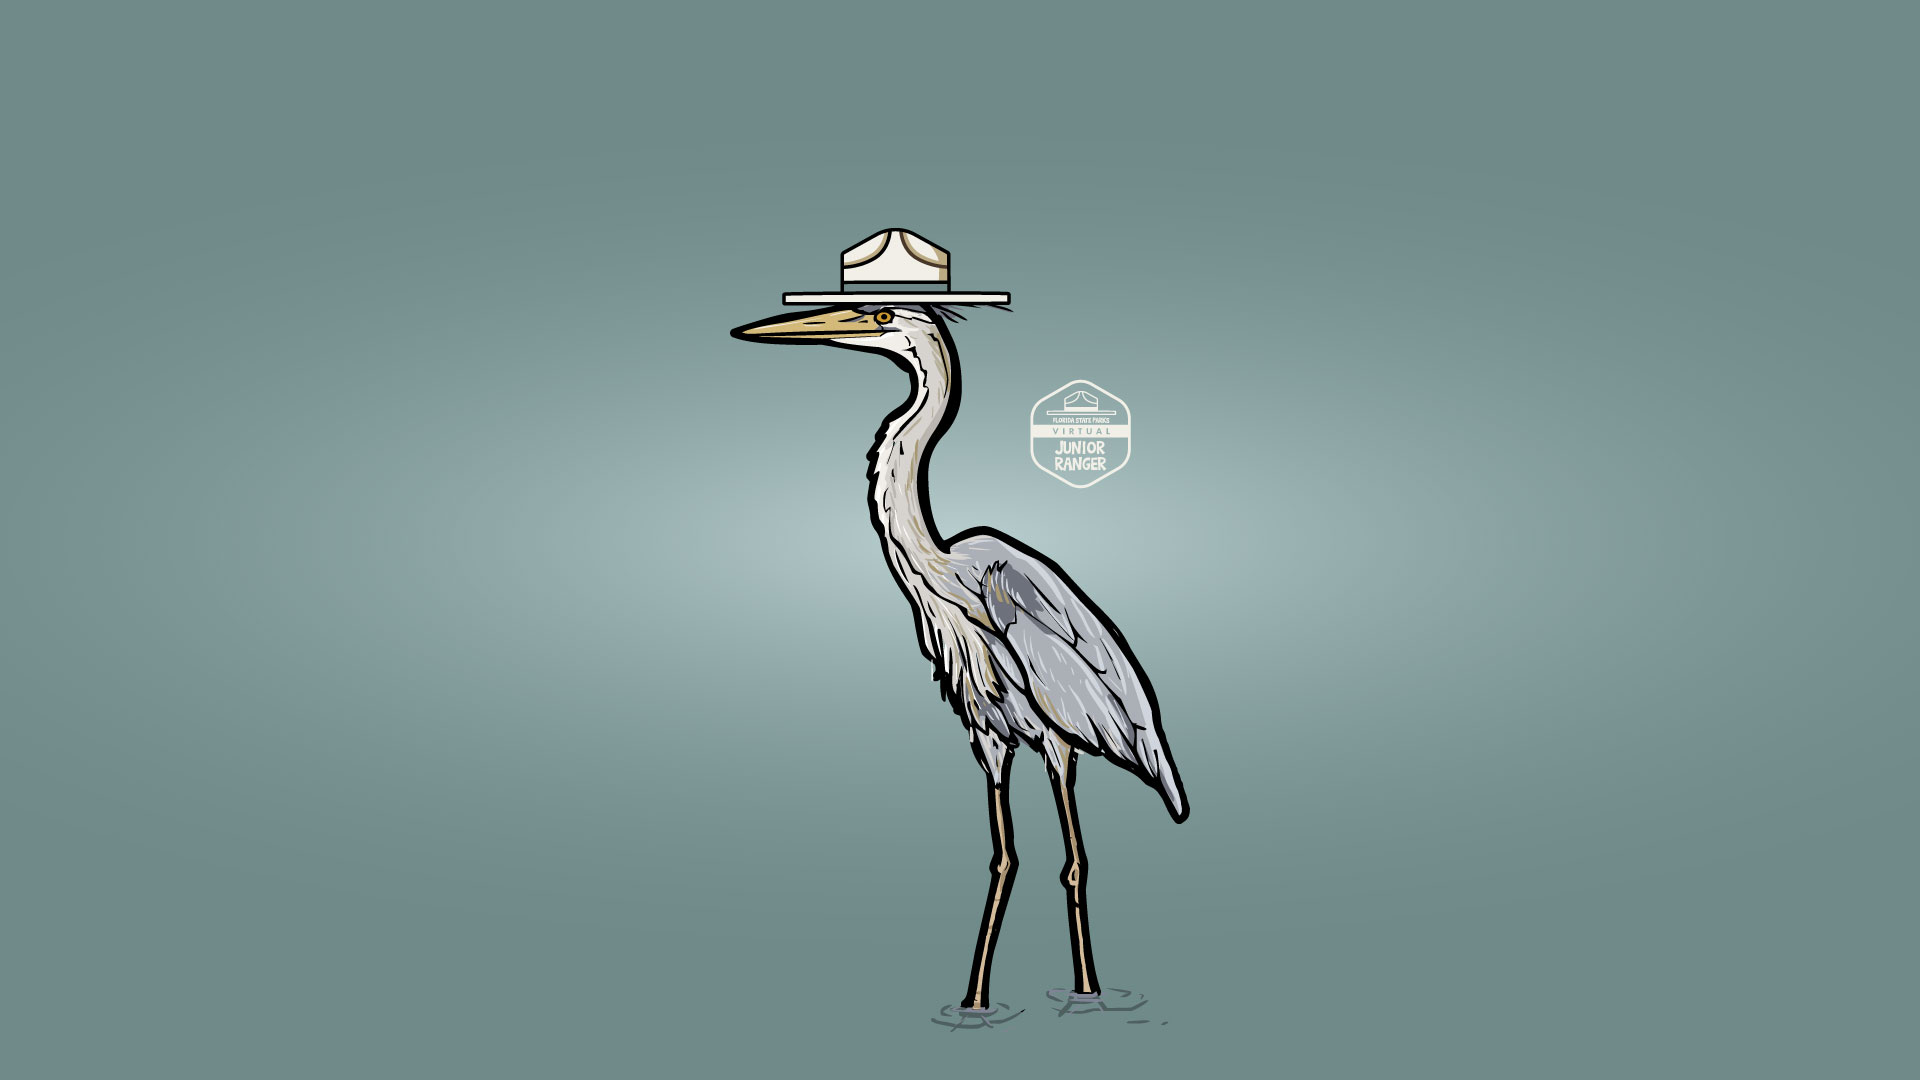 Image of a Great Blue Heron wearing a Ranger hat, sized for computer